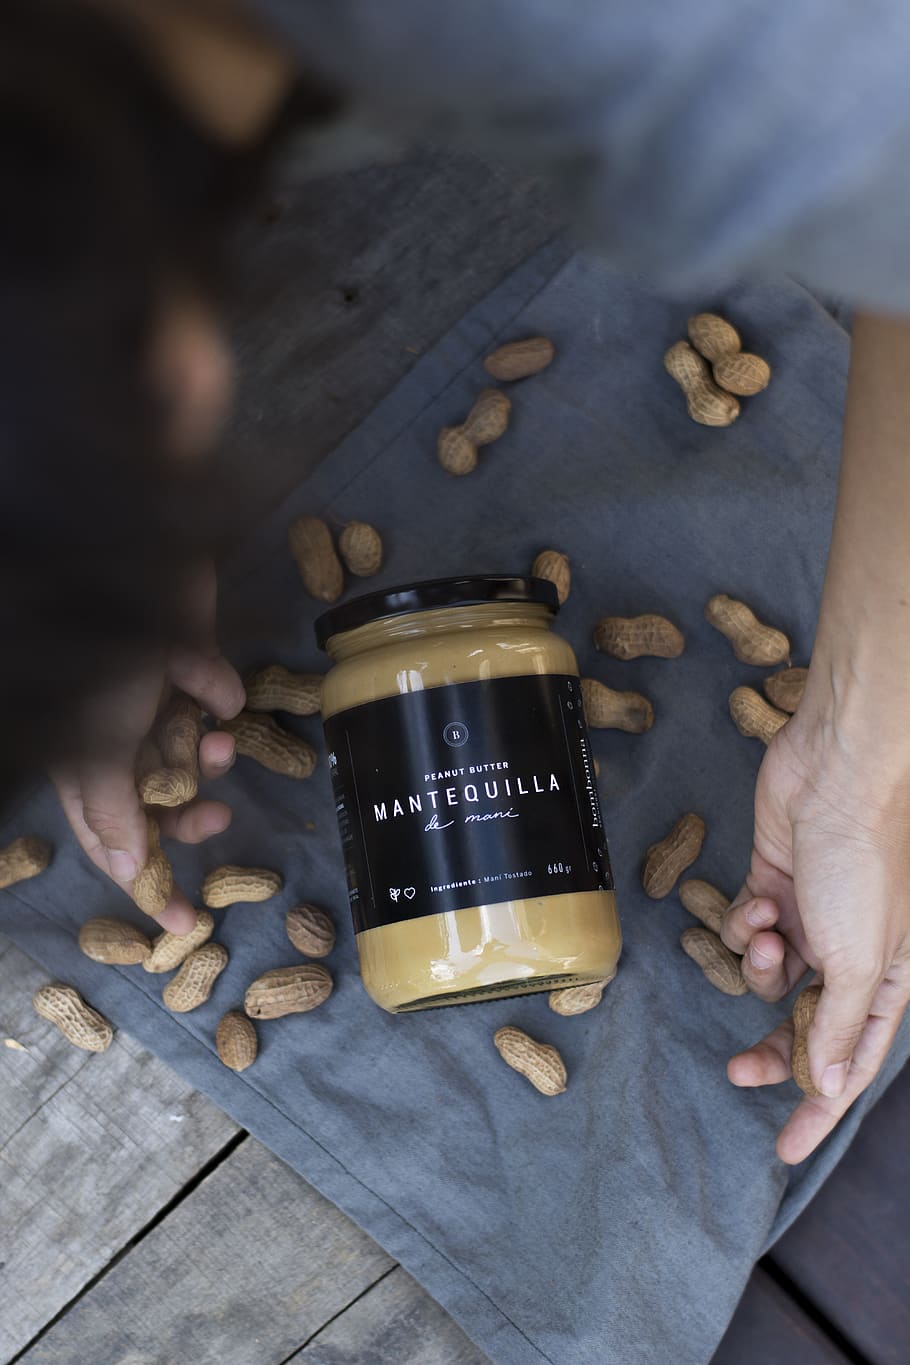 Wantequilla bottle, plant, vegetable, food, nut, almond, person